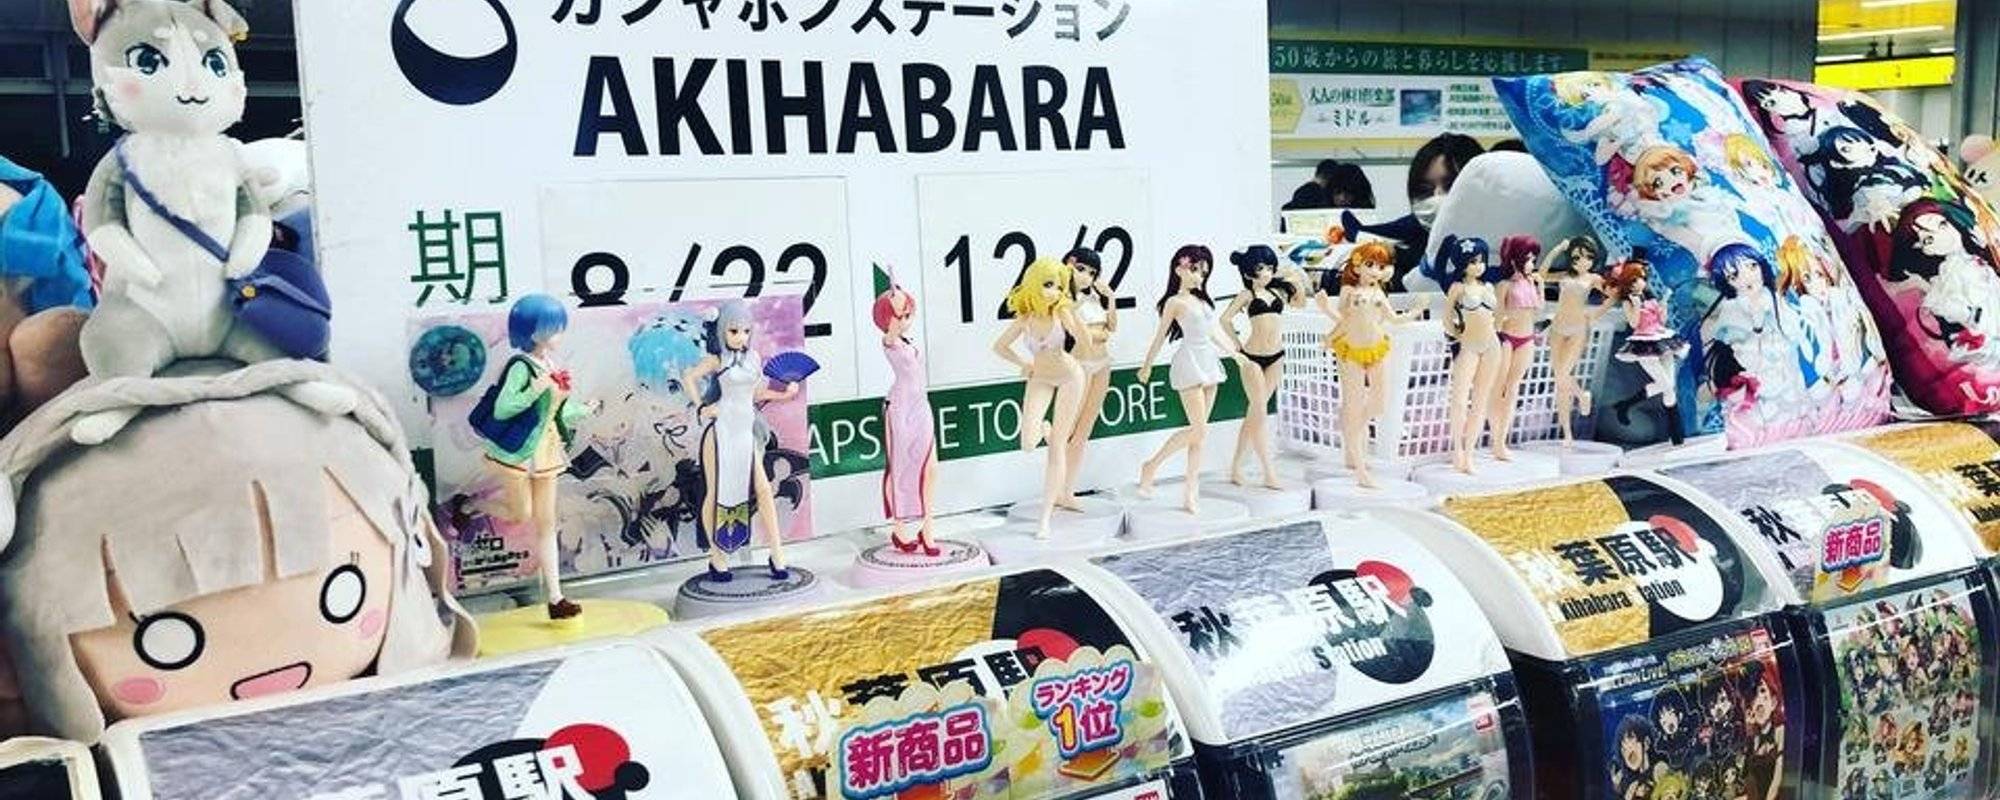 Limited Time Capsule Toy Machines @ Akihabara JR Station, Japan with Travelgirl